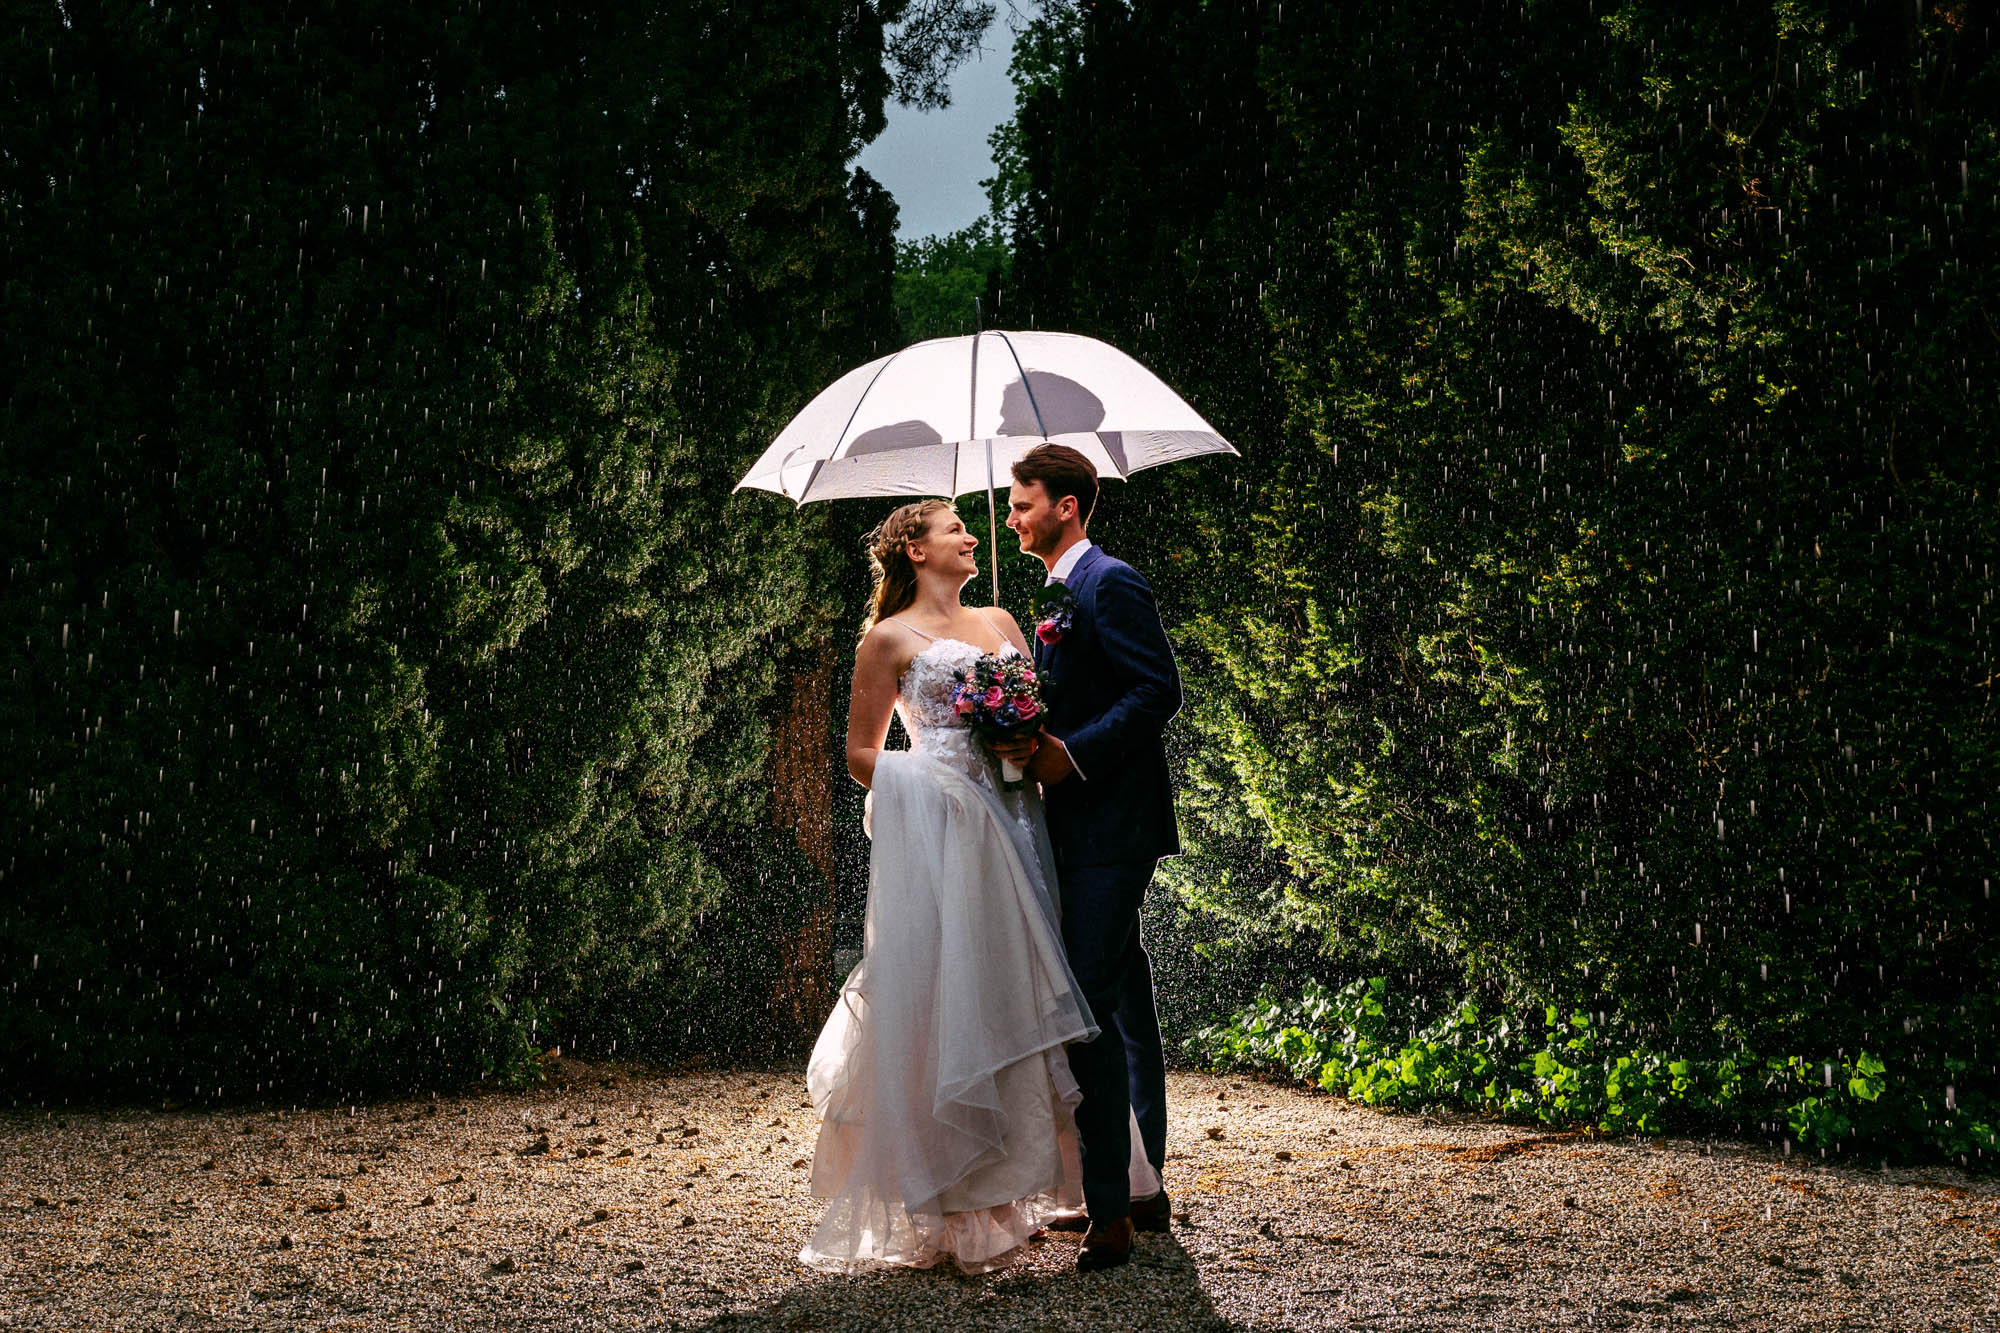 Rain at your wedding - A bride and groom stand under an umbrella in the rain.